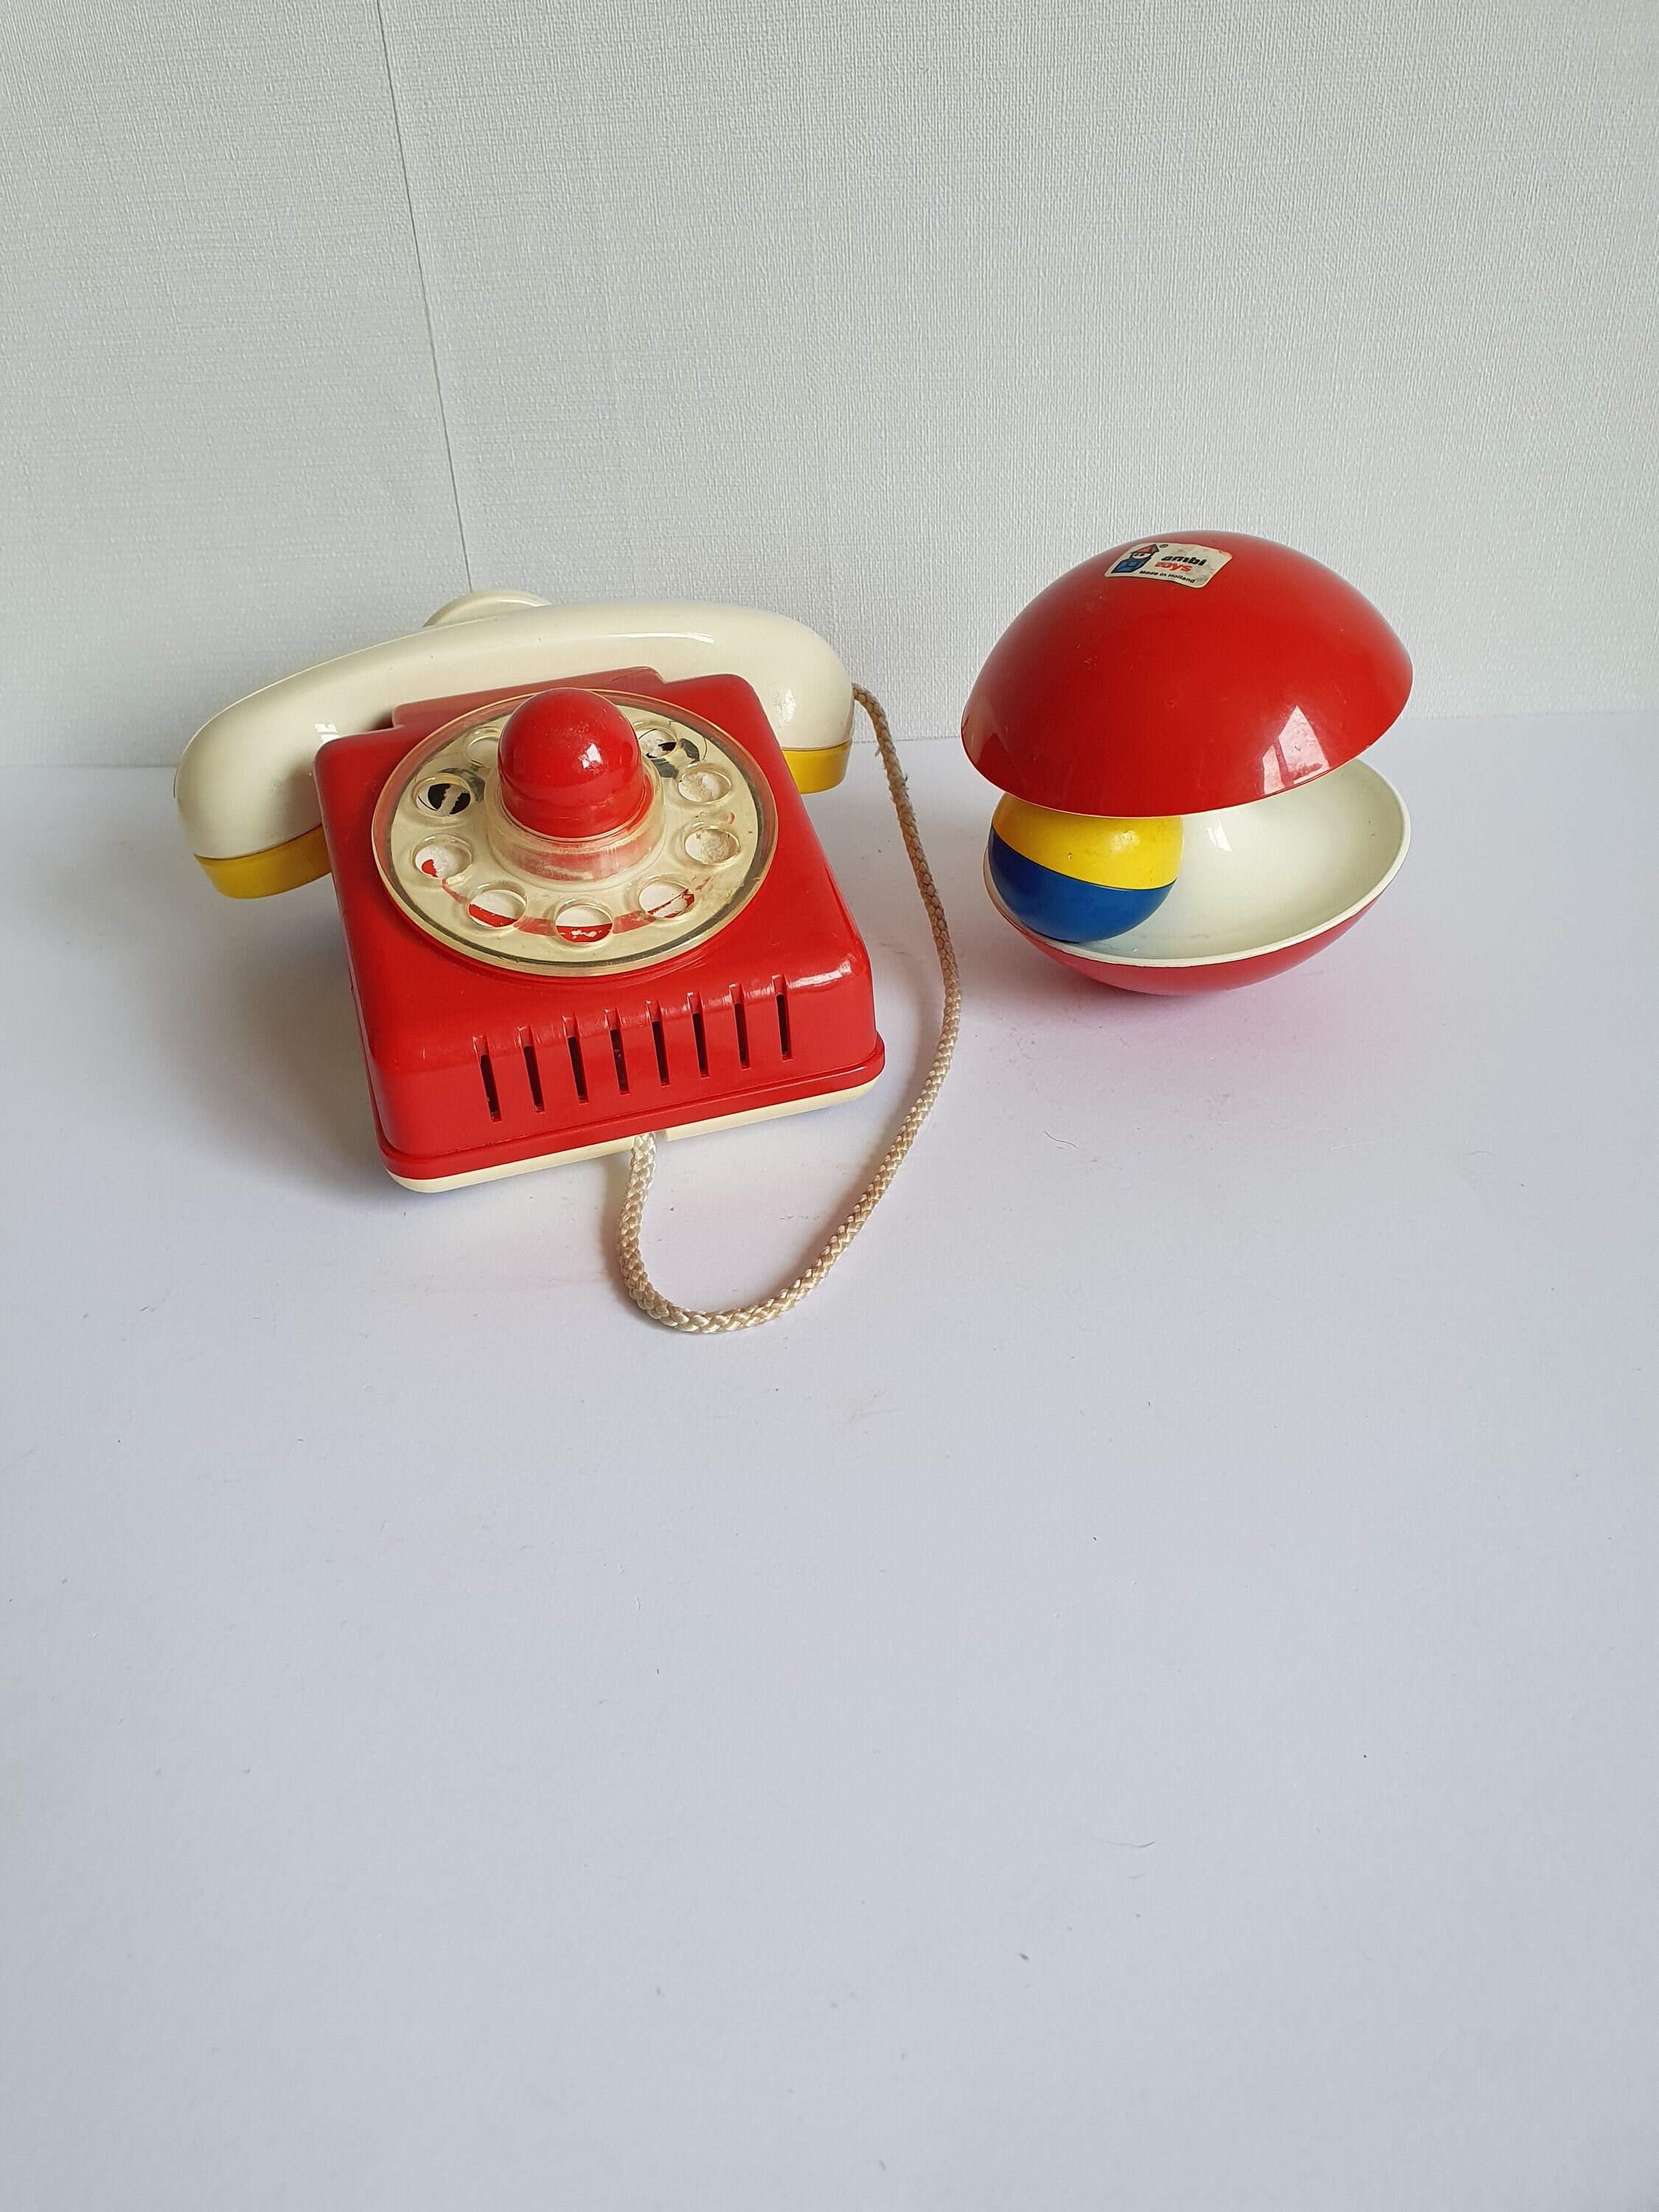 Vintage 1970’s Children’s Toy Telephone By Ambi